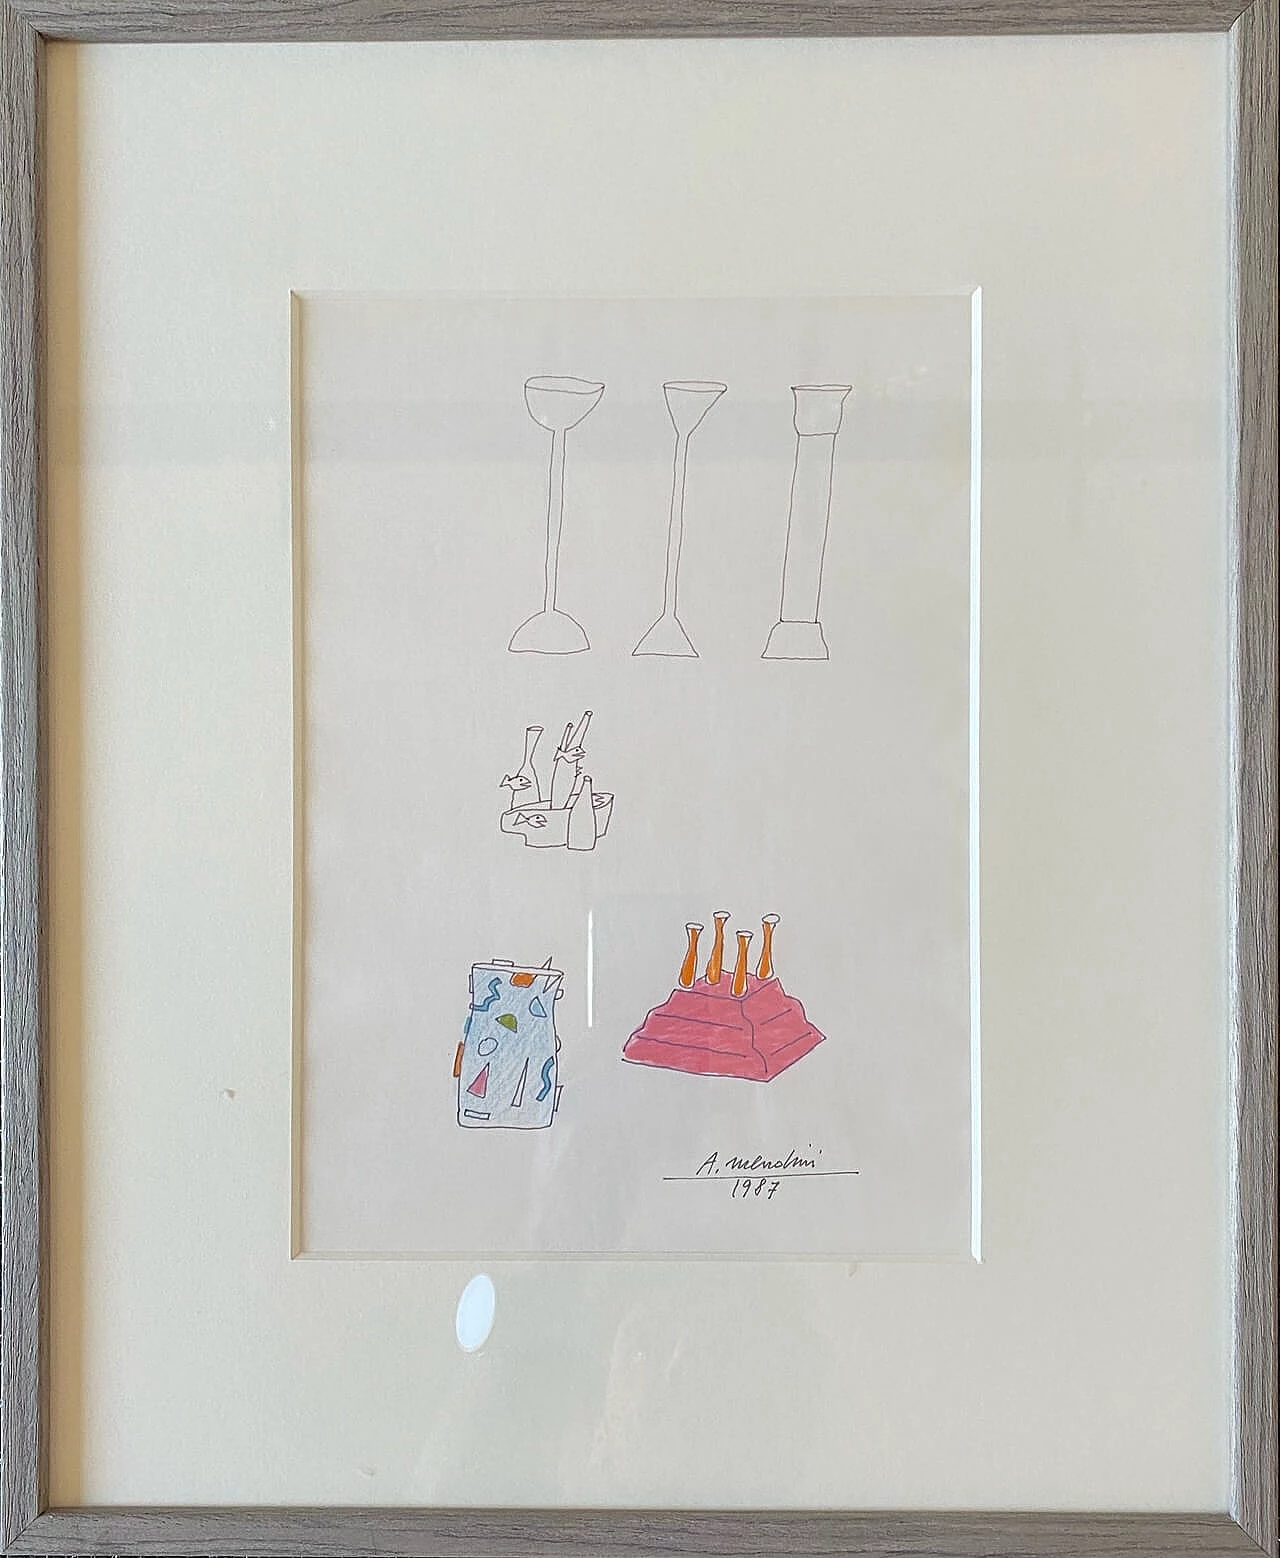 Alessandro Mendini, Vases for the Ollo Collection, Alchimia, 1987-1988, marker drawing and pencil on paper, 1980s 1